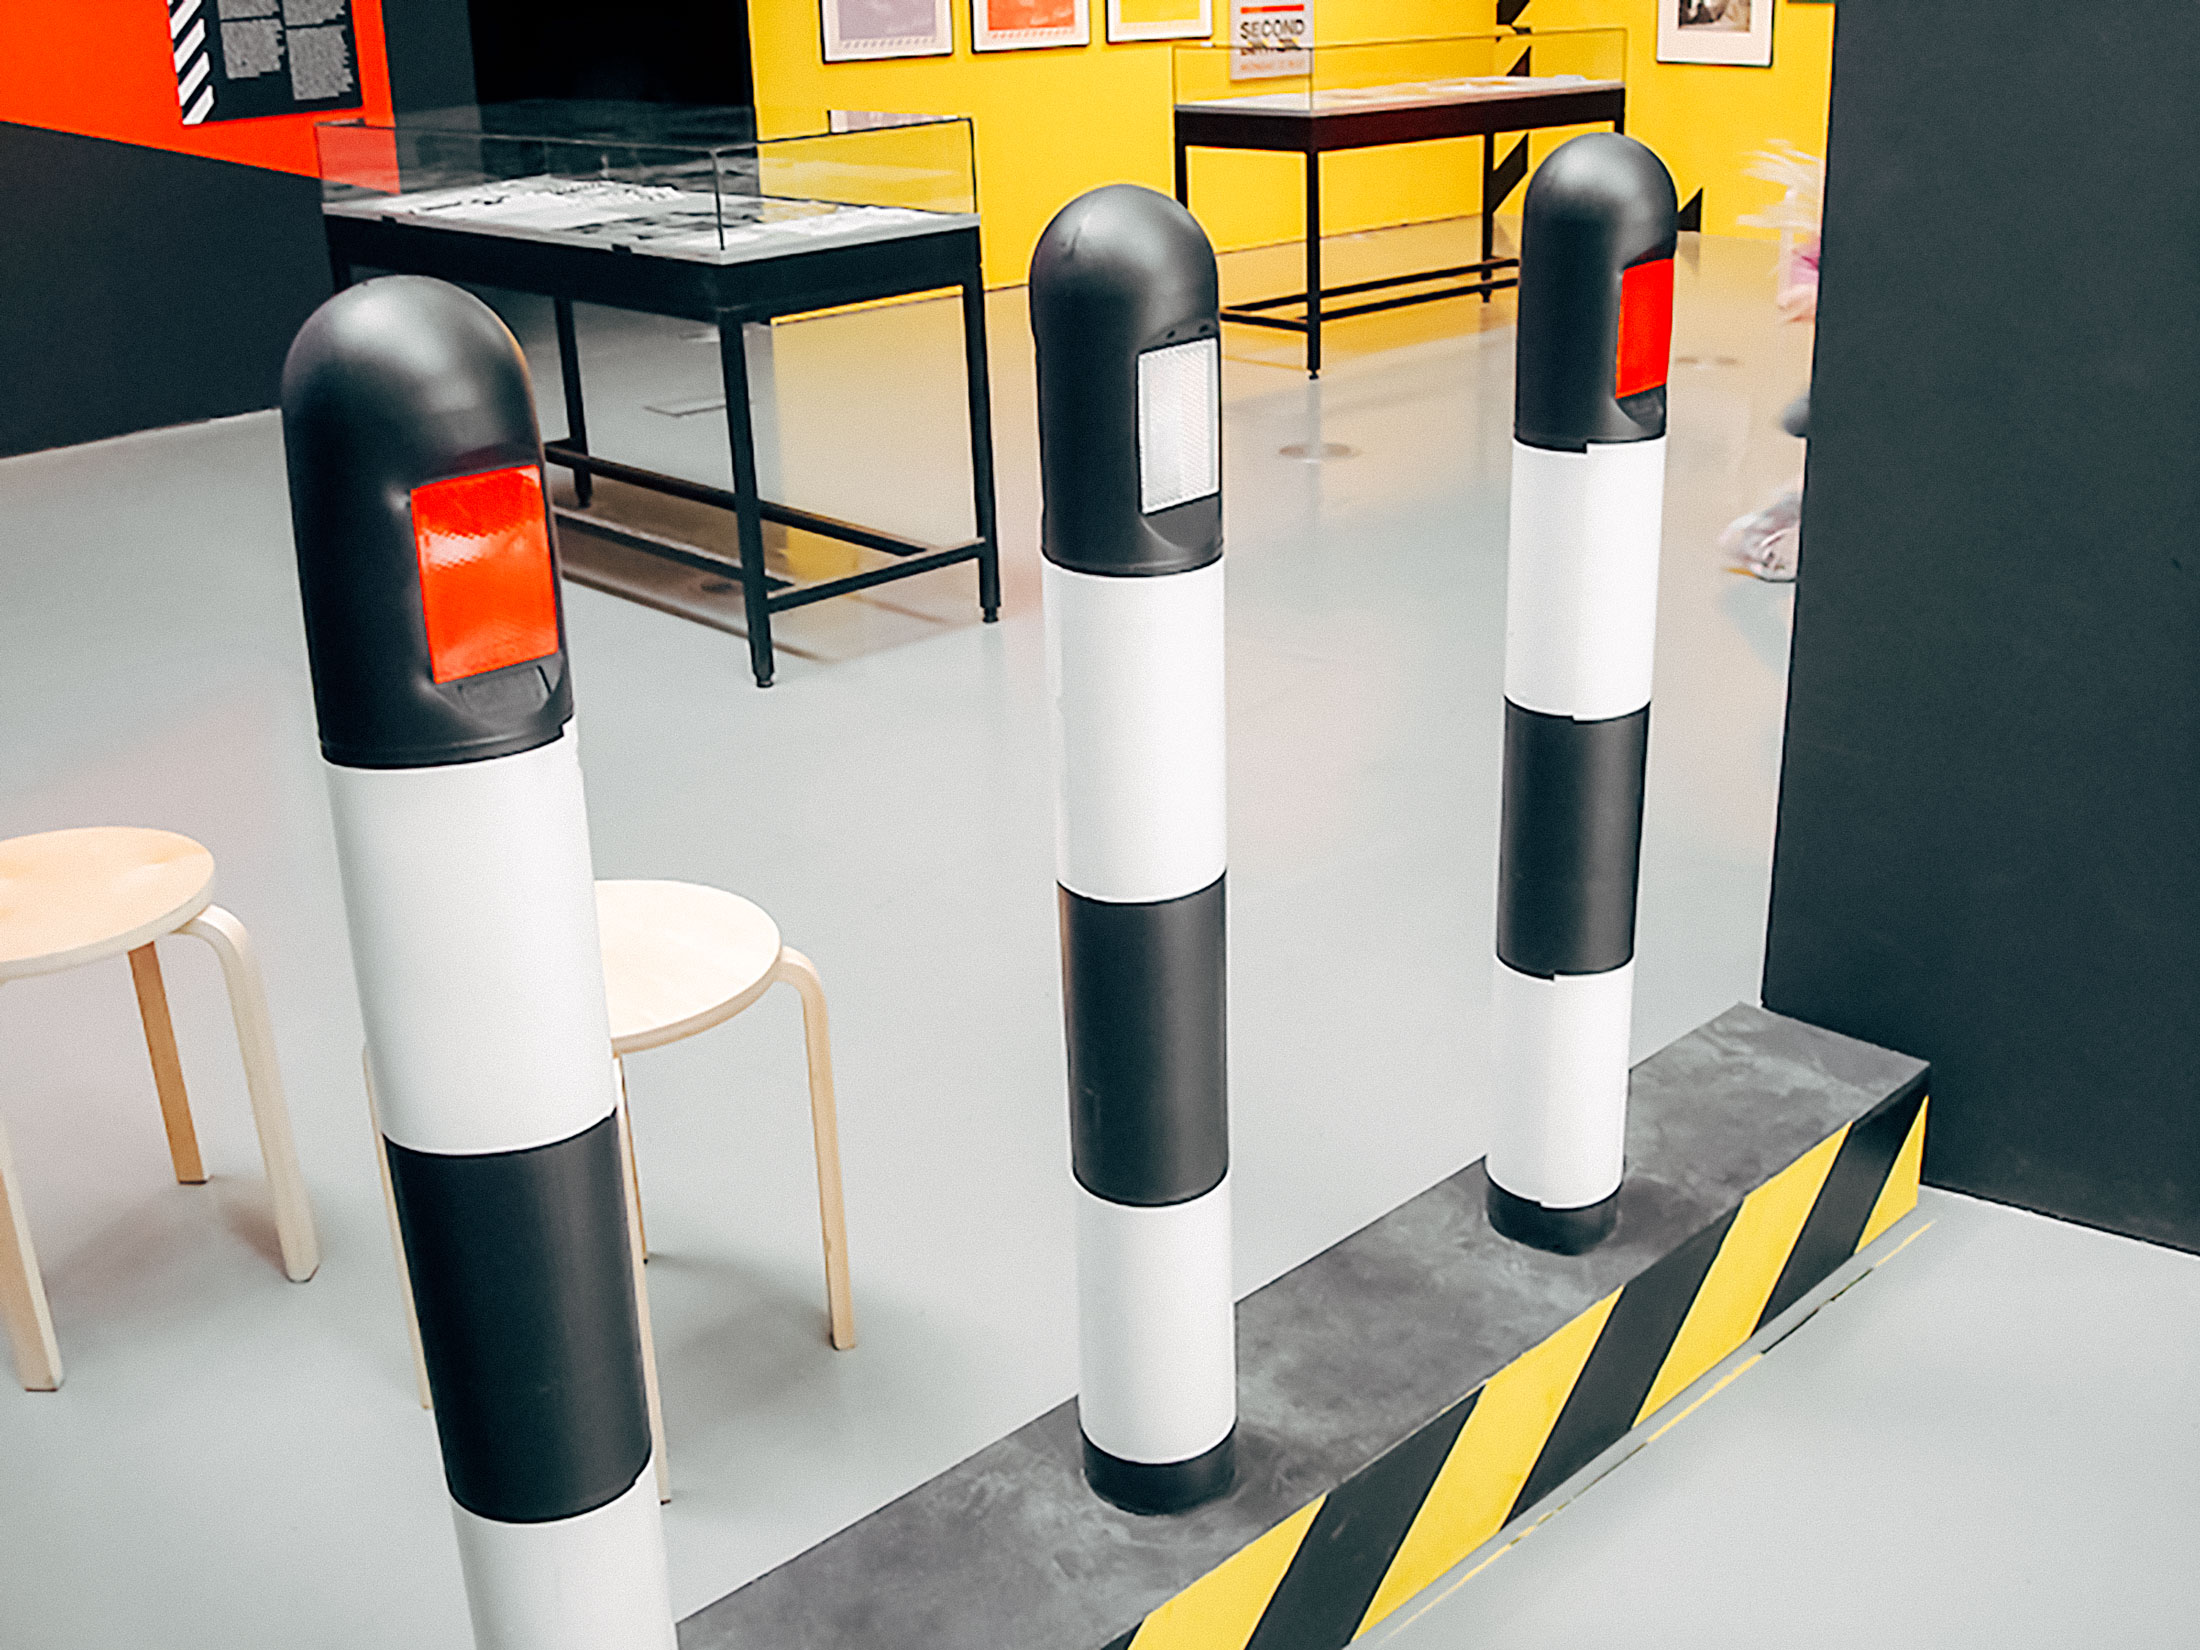 3 road bollards, black striped, from the original Haçienda nightclub in Manchester. They are up for sale in an art gallery.